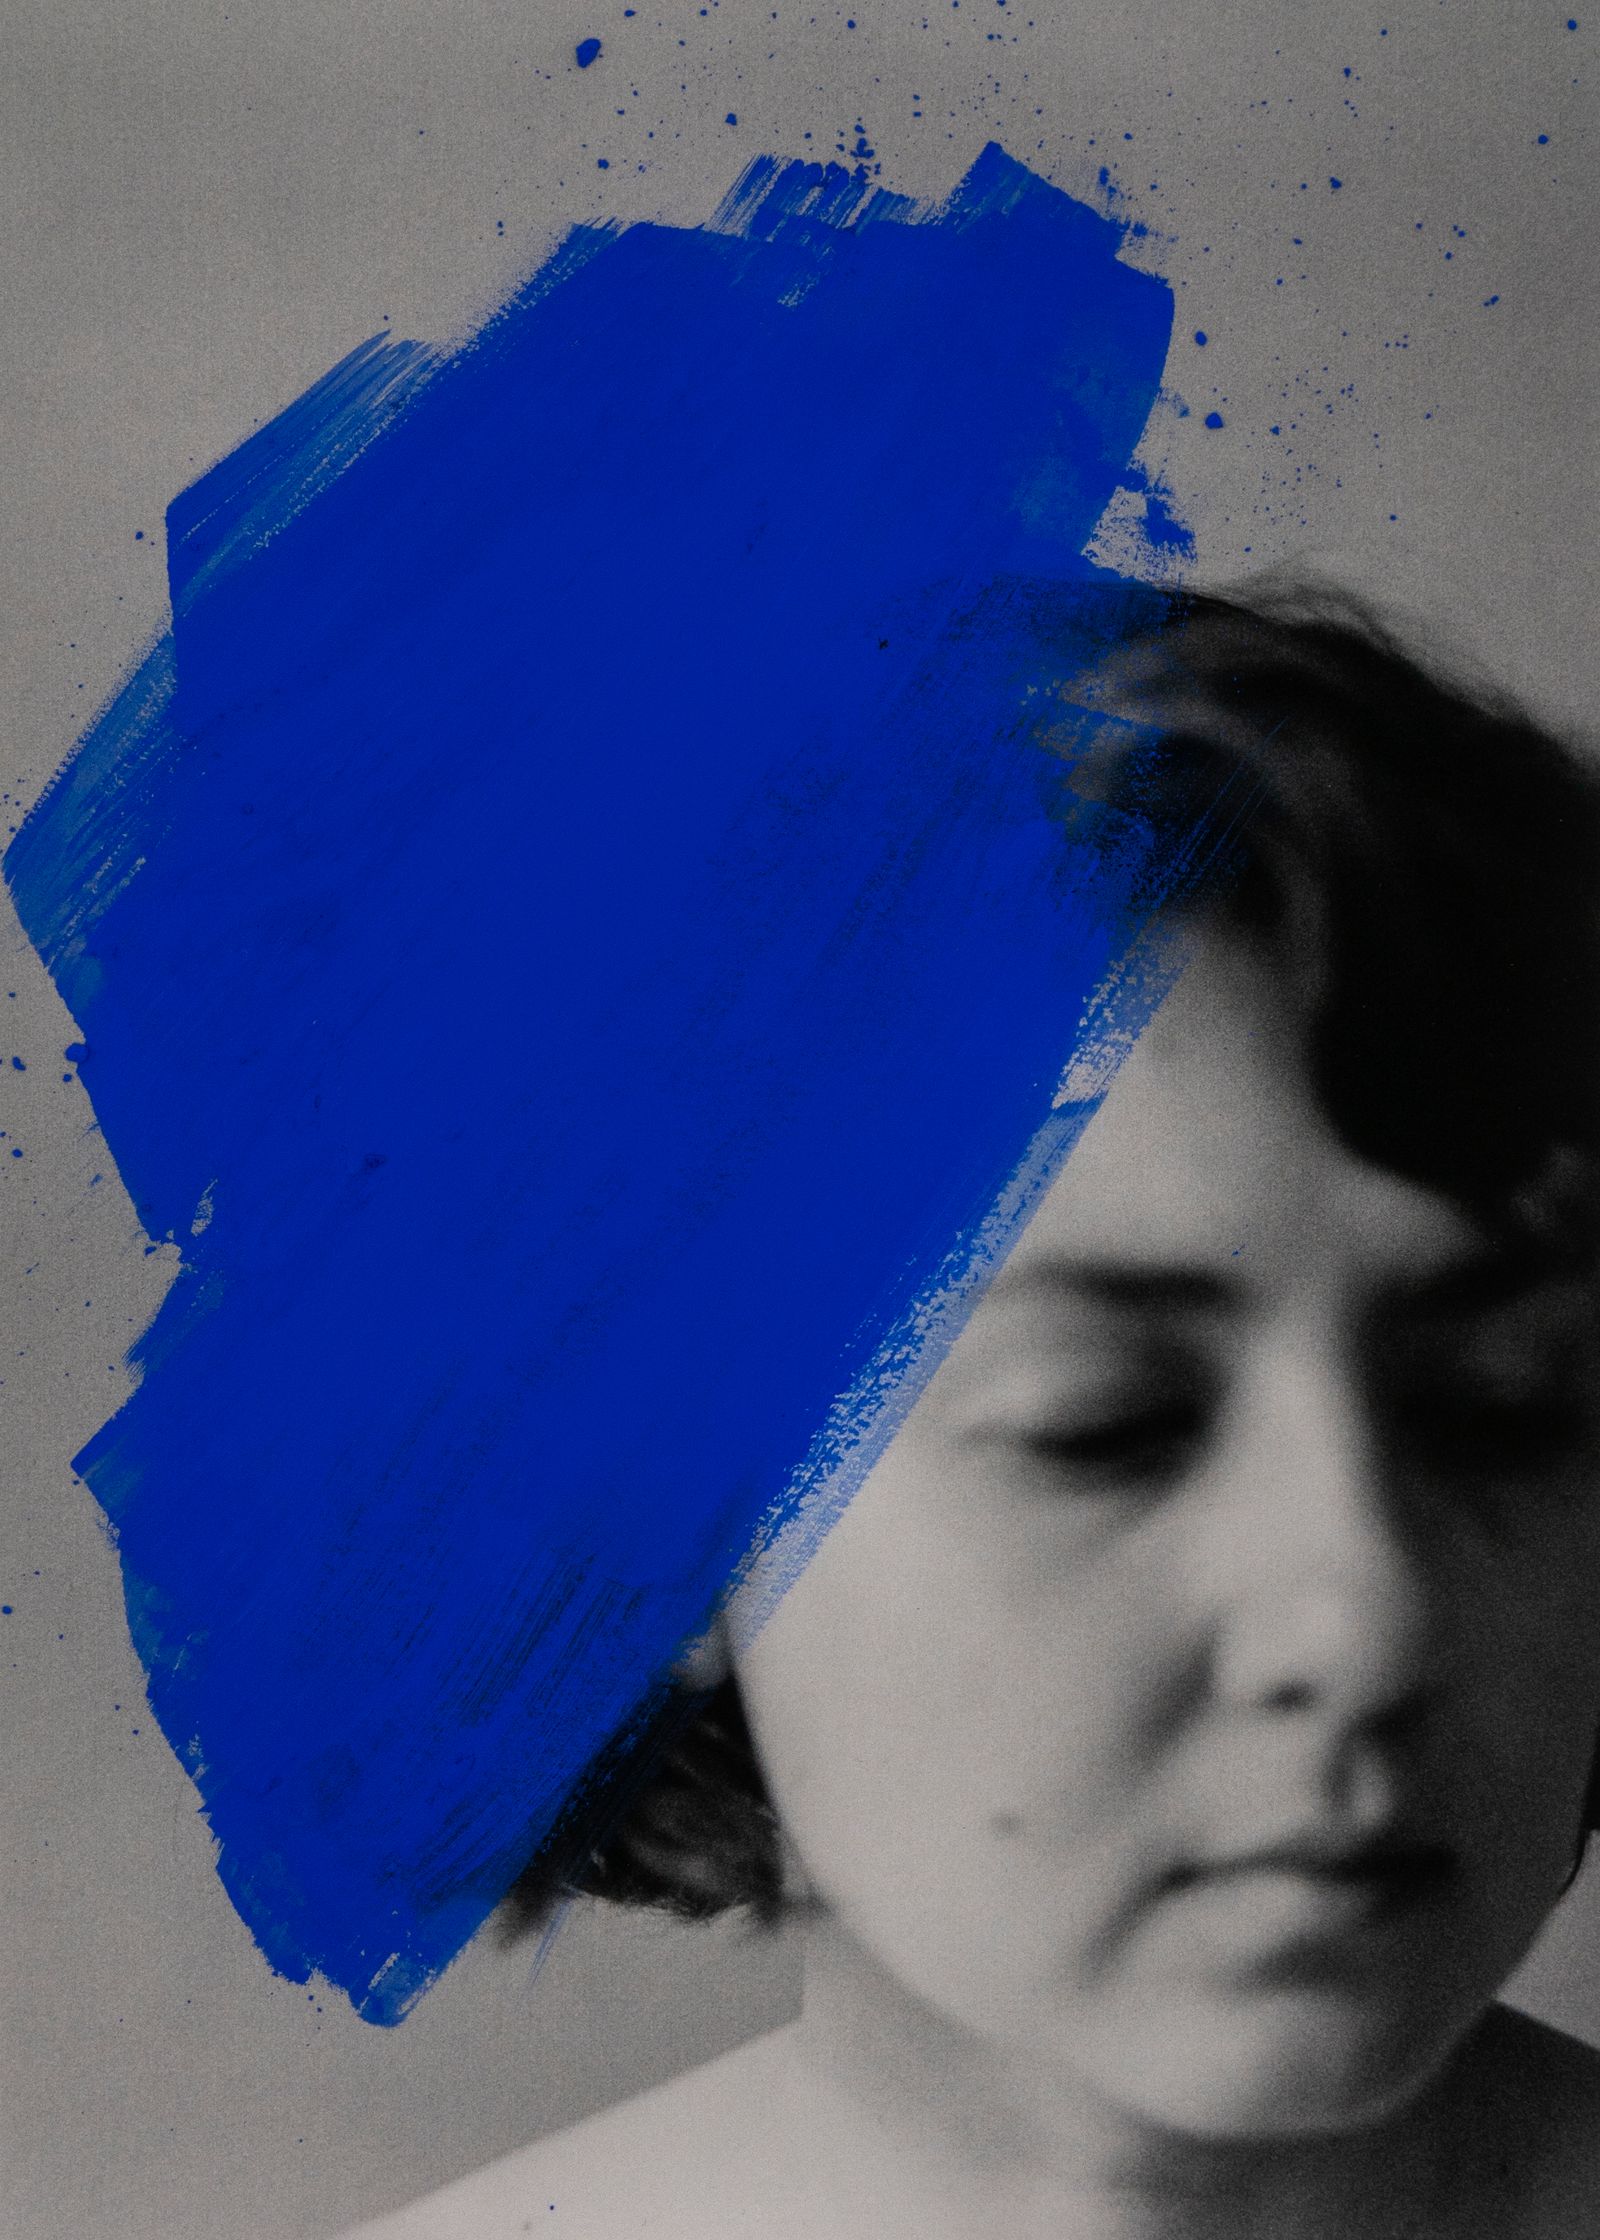 © Merve Terzi - Image from the in blue photography project